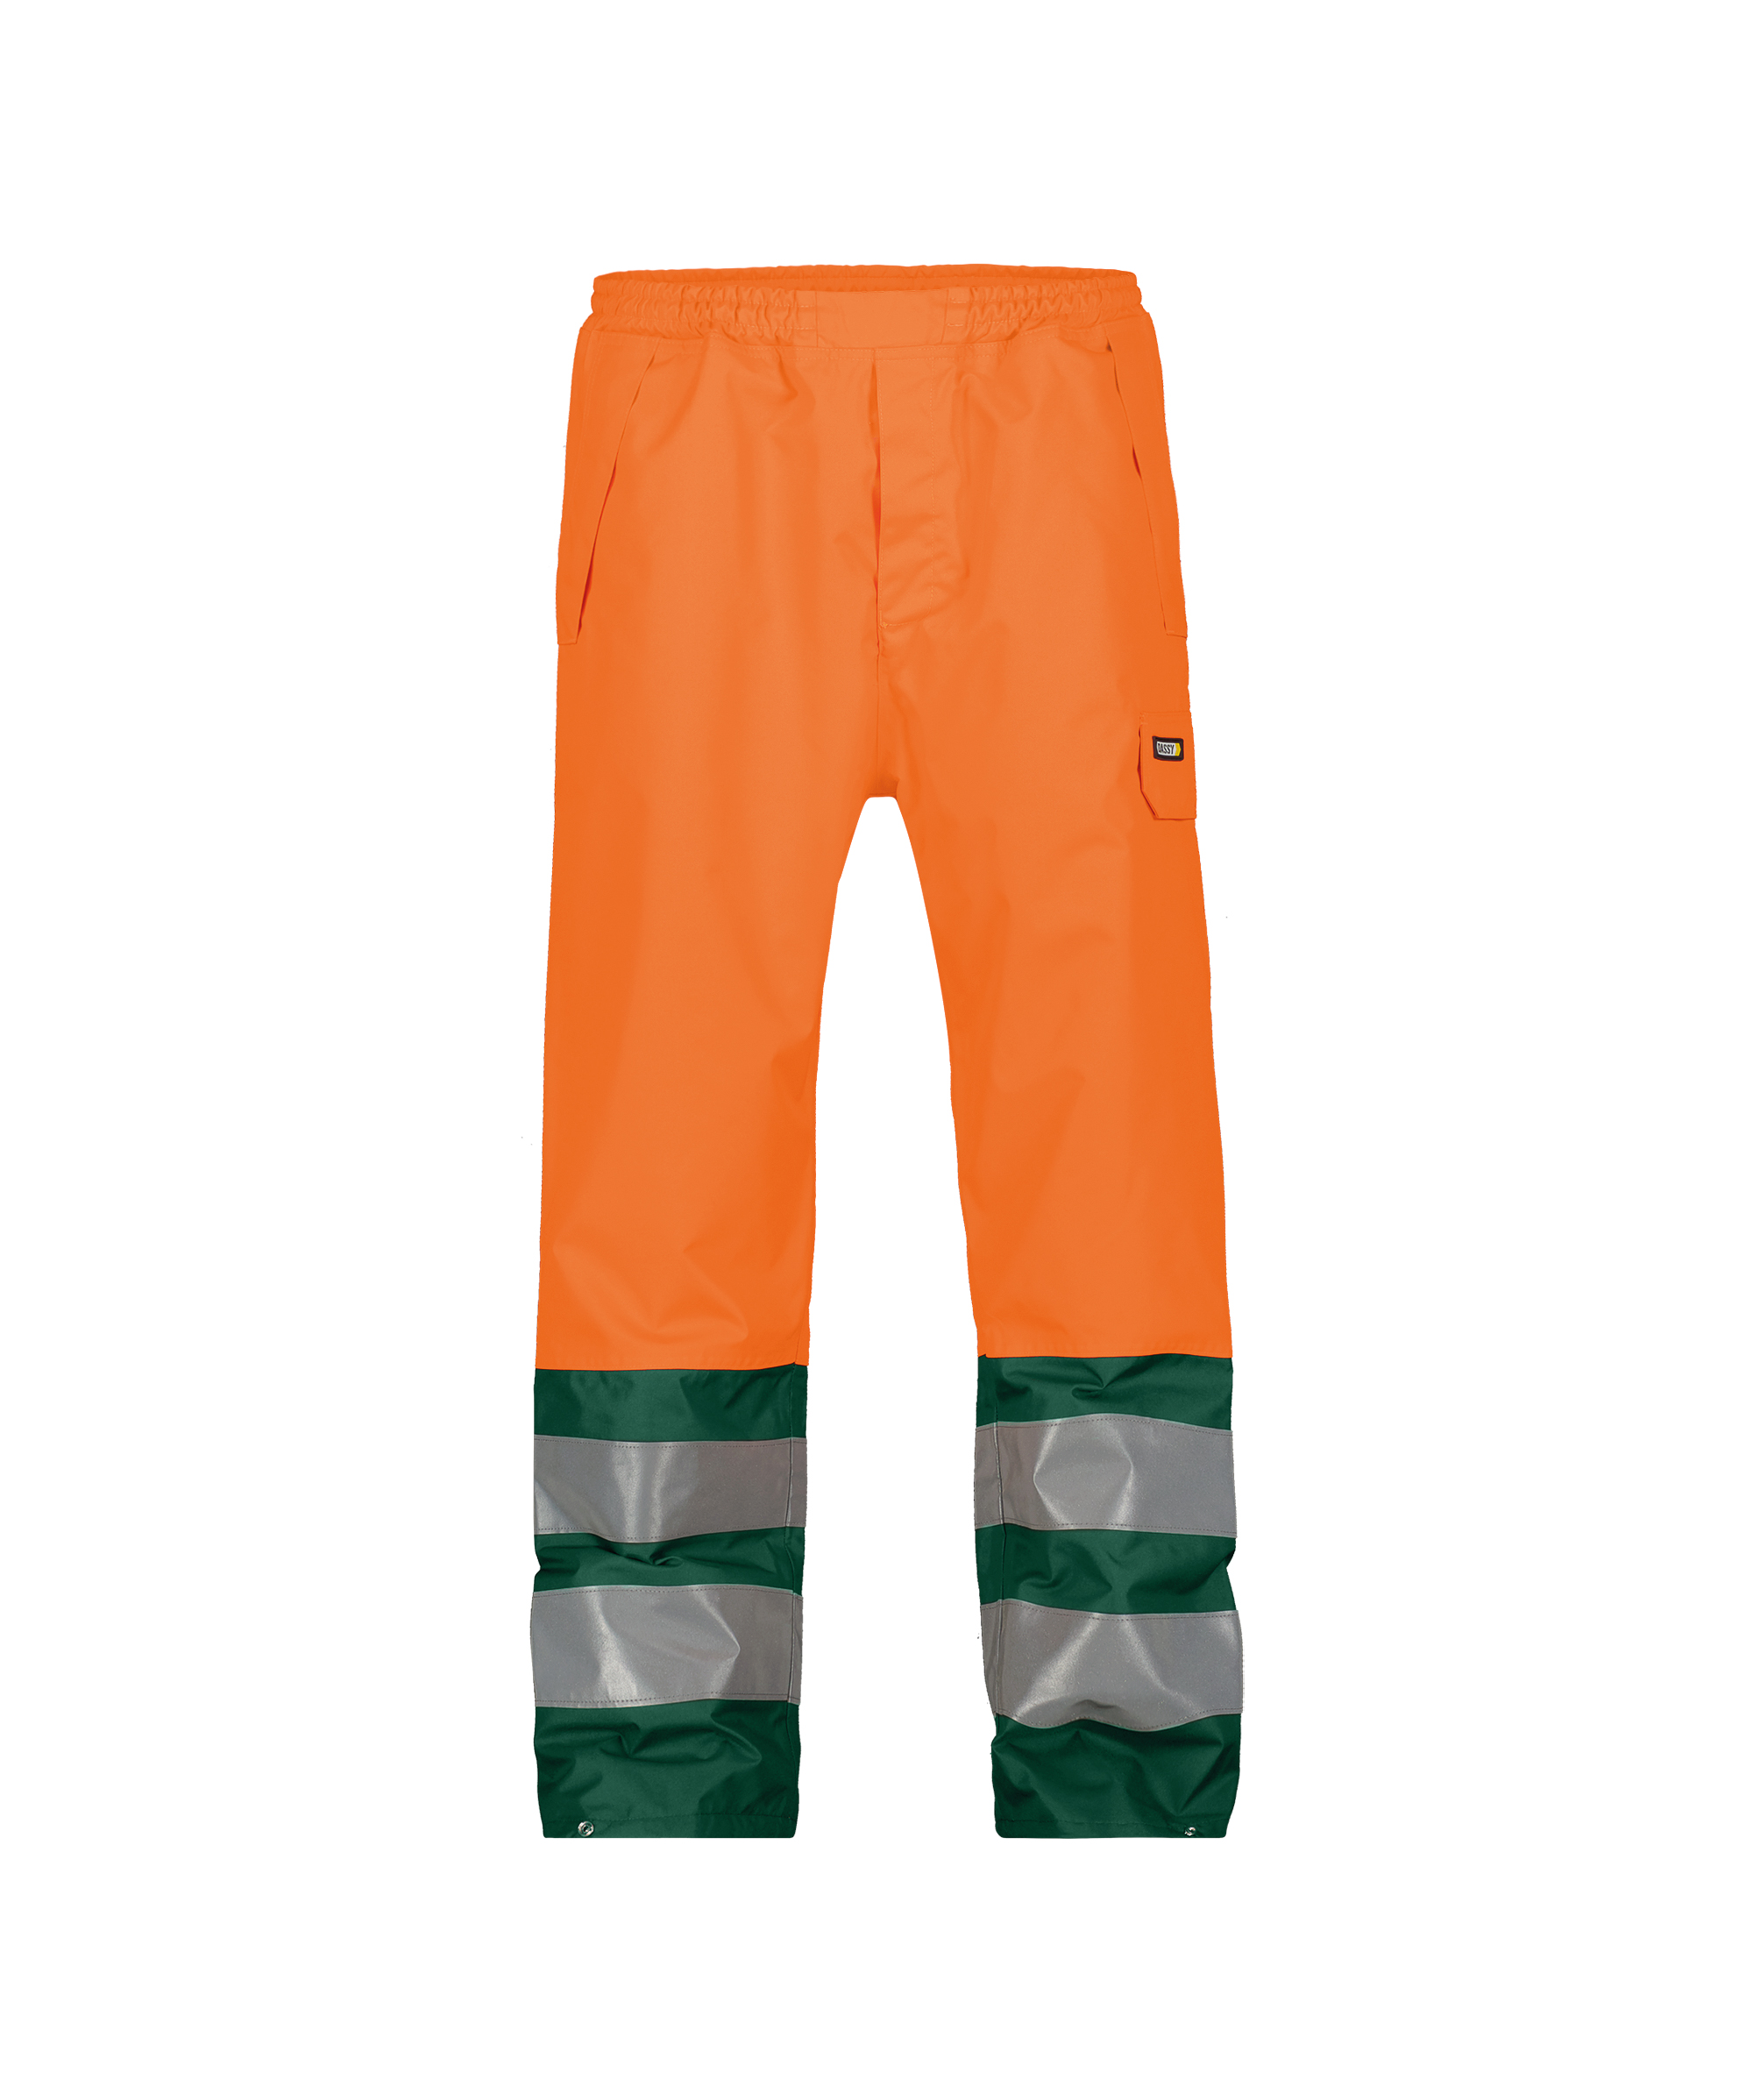 lightweight trousers with elastic waistband green/orange Cut protection trousers class 1 forest trousers Woodsafe KWF-tested mens lumberjack trousers with cut-protection form A